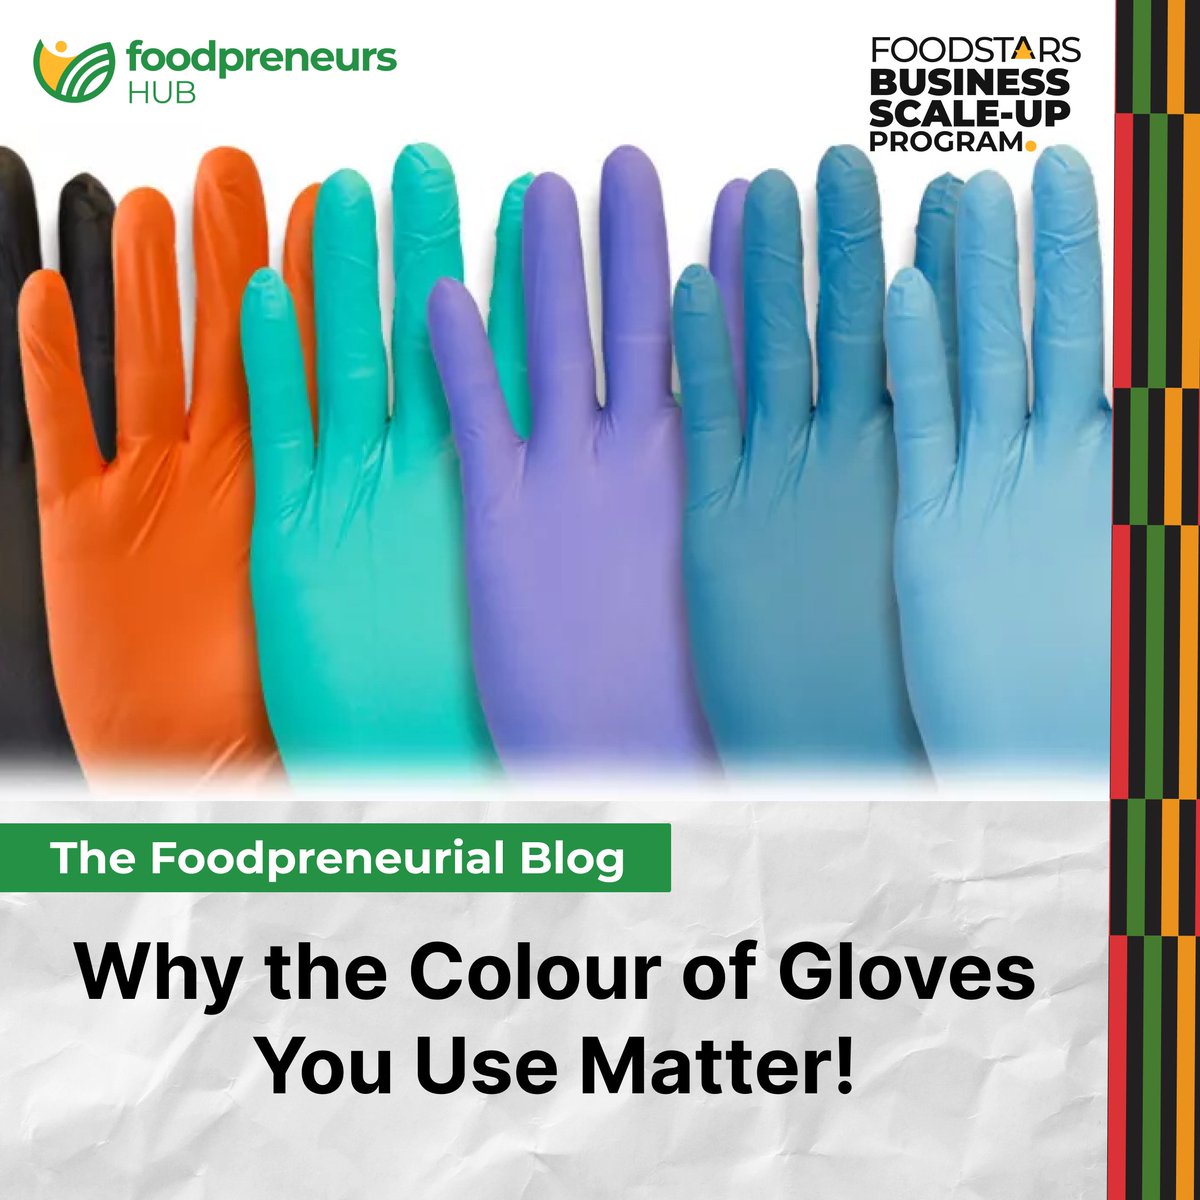 Keep Your Food Safe with Coloured Gloves! 🧤
Did you know that using coloured disposable gloves can significantly reduce the risk of contamination in your food processing? 
read more foodpreneurshub.com/blogs

#israel #foodsafety #foodbusiness #foodsecurity  #sdg3 #Entrepreneur